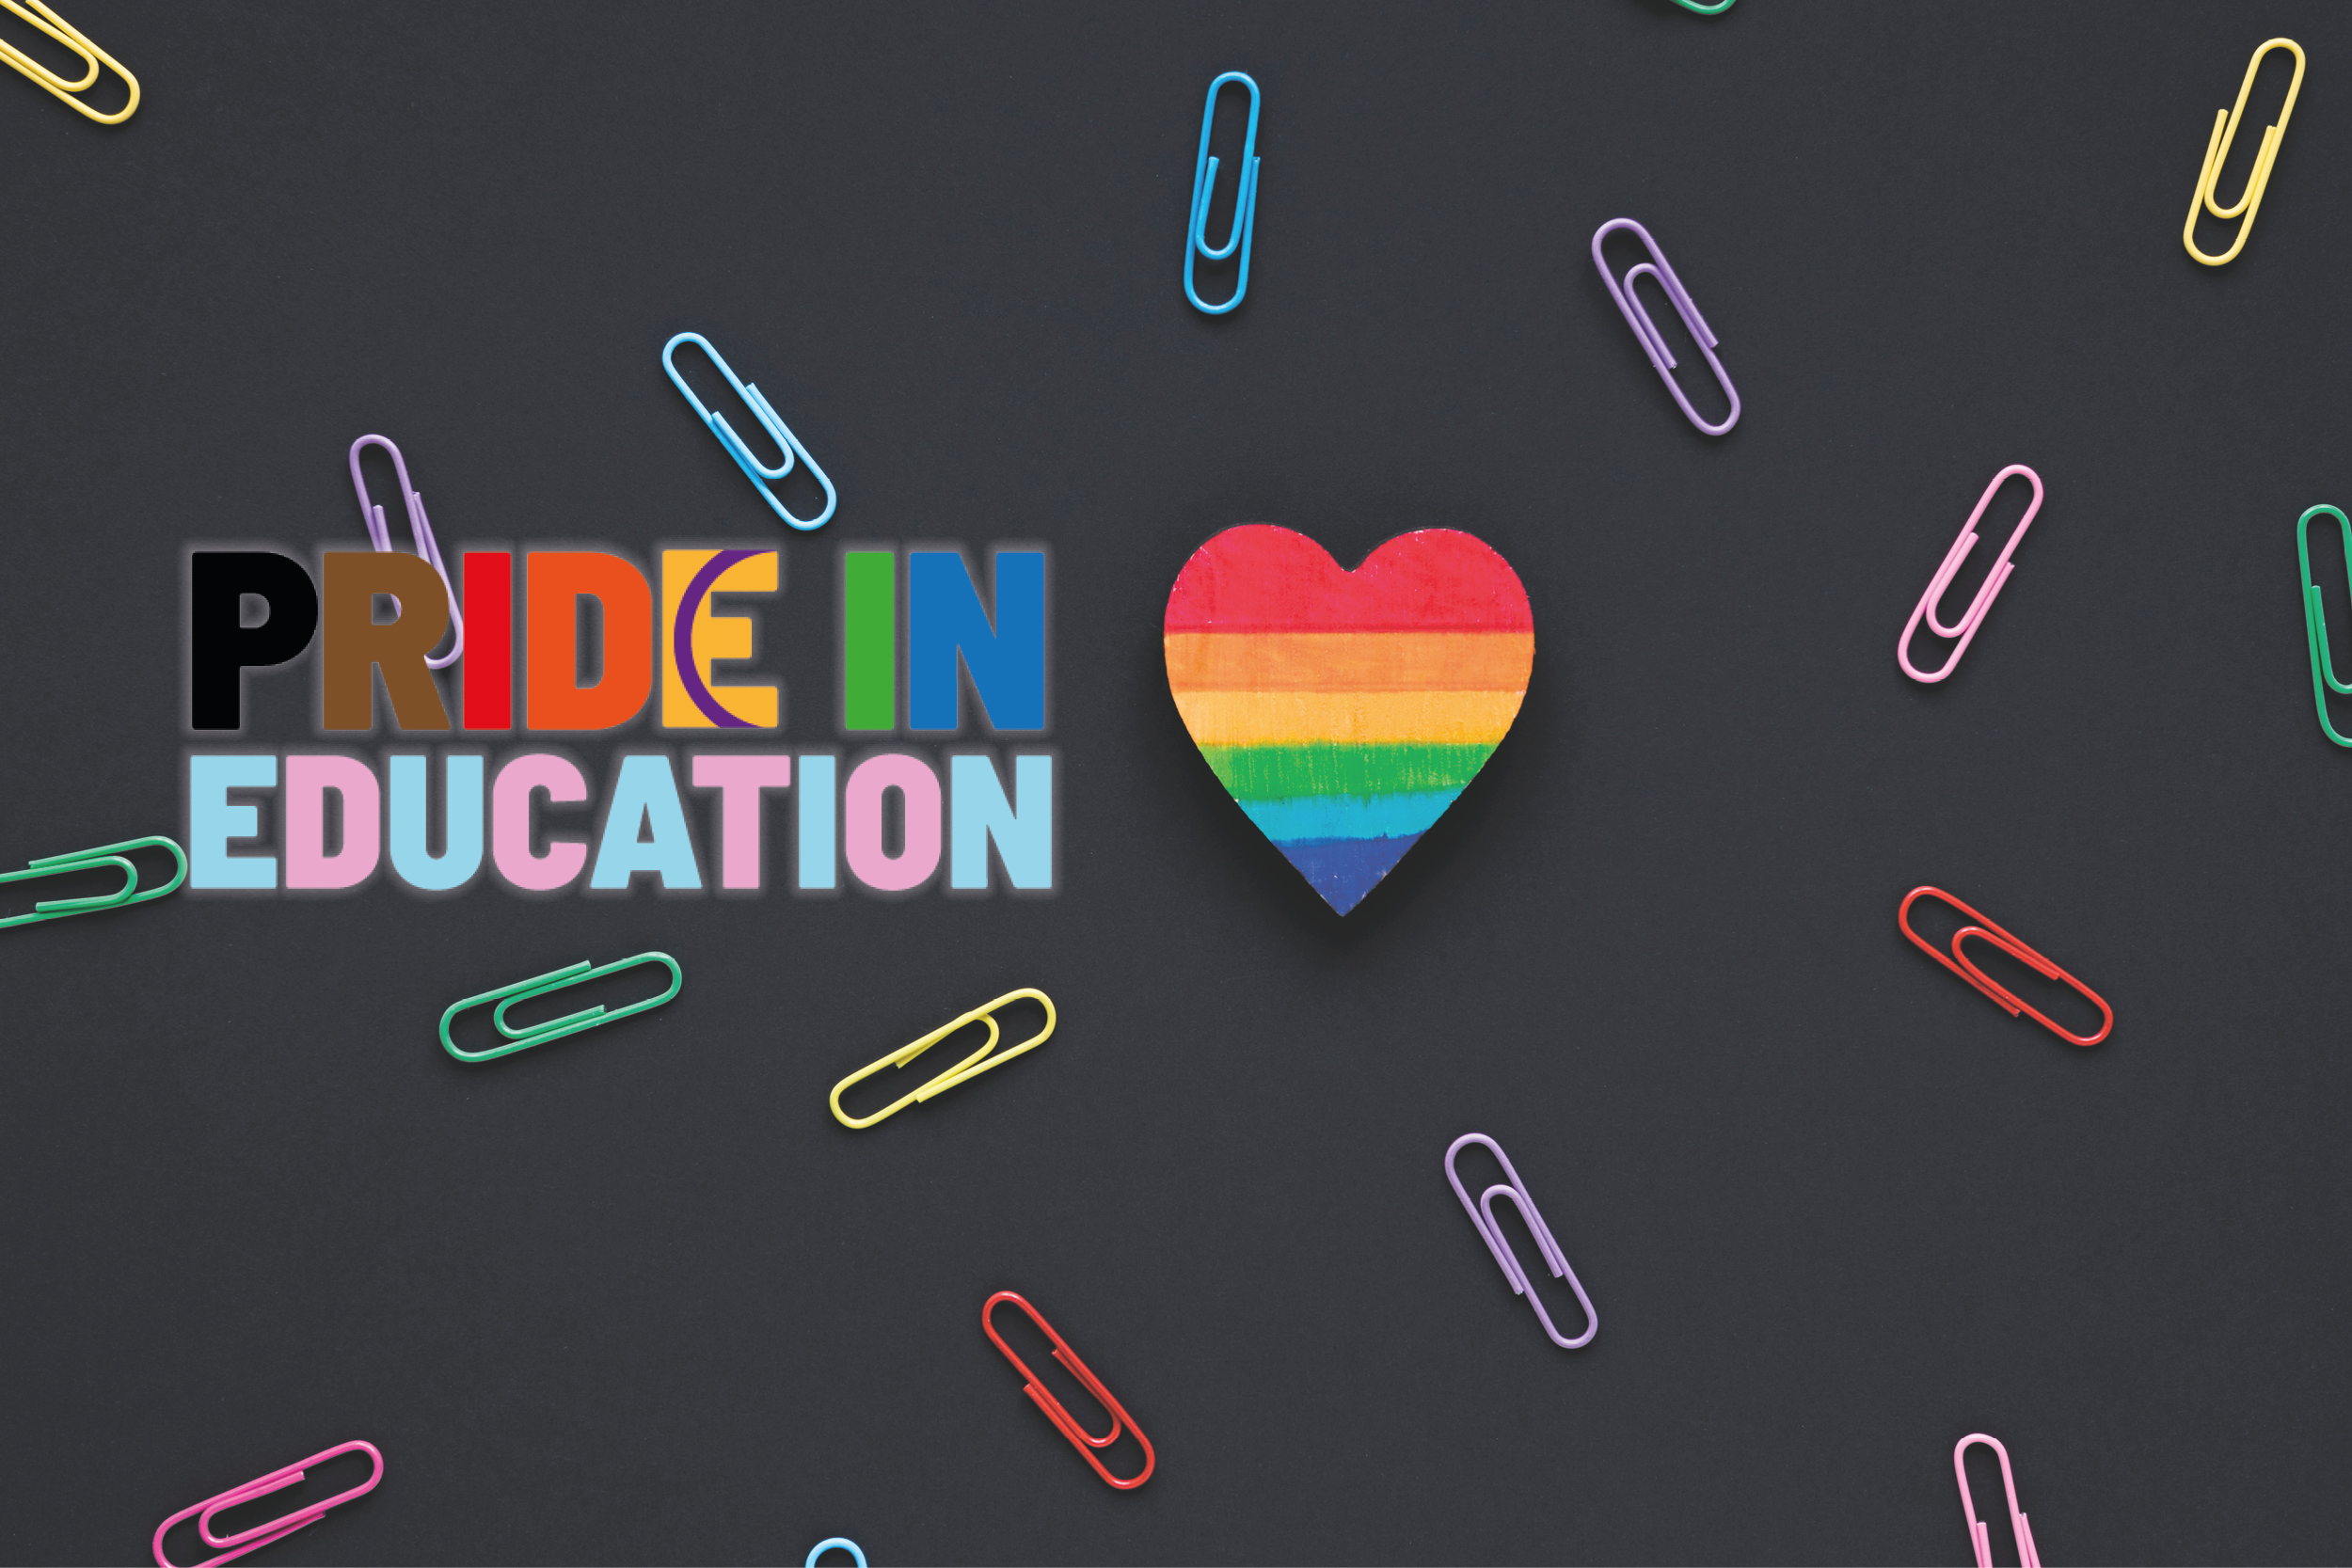 Pride in Education partners with Festival of Education to “address the rising challenges to trans rights and LGBTQ+ inclusive education” in the UK